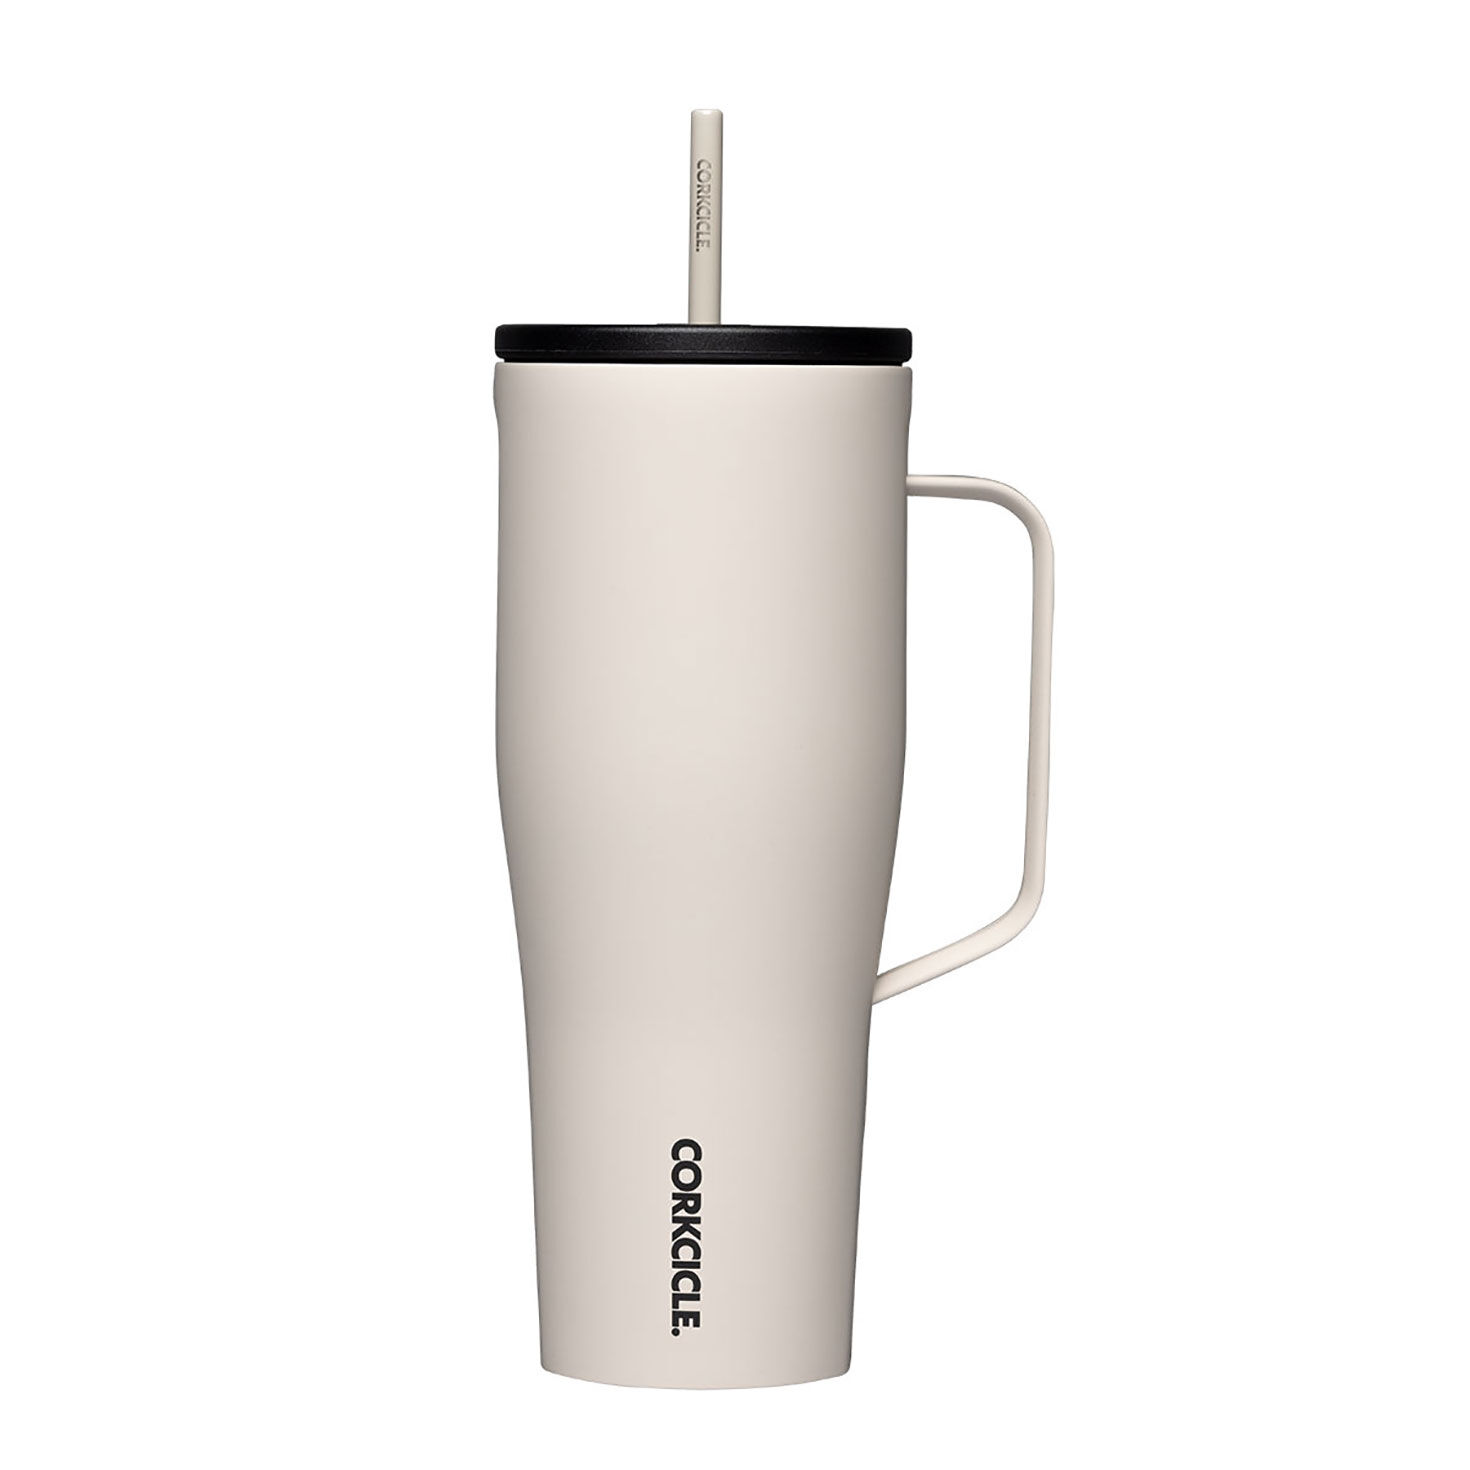 https://www.hallmark.com/dw/image/v2/AALB_PRD/on/demandware.static/-/Sites-hallmark-master/default/dw373e1473/images/finished-goods/products/2230CLT/Corkcicle-XLarge-Tan-Metal-Cup-With-Handle-and-Straw_2230CLT_01.jpg?sfrm=jpg